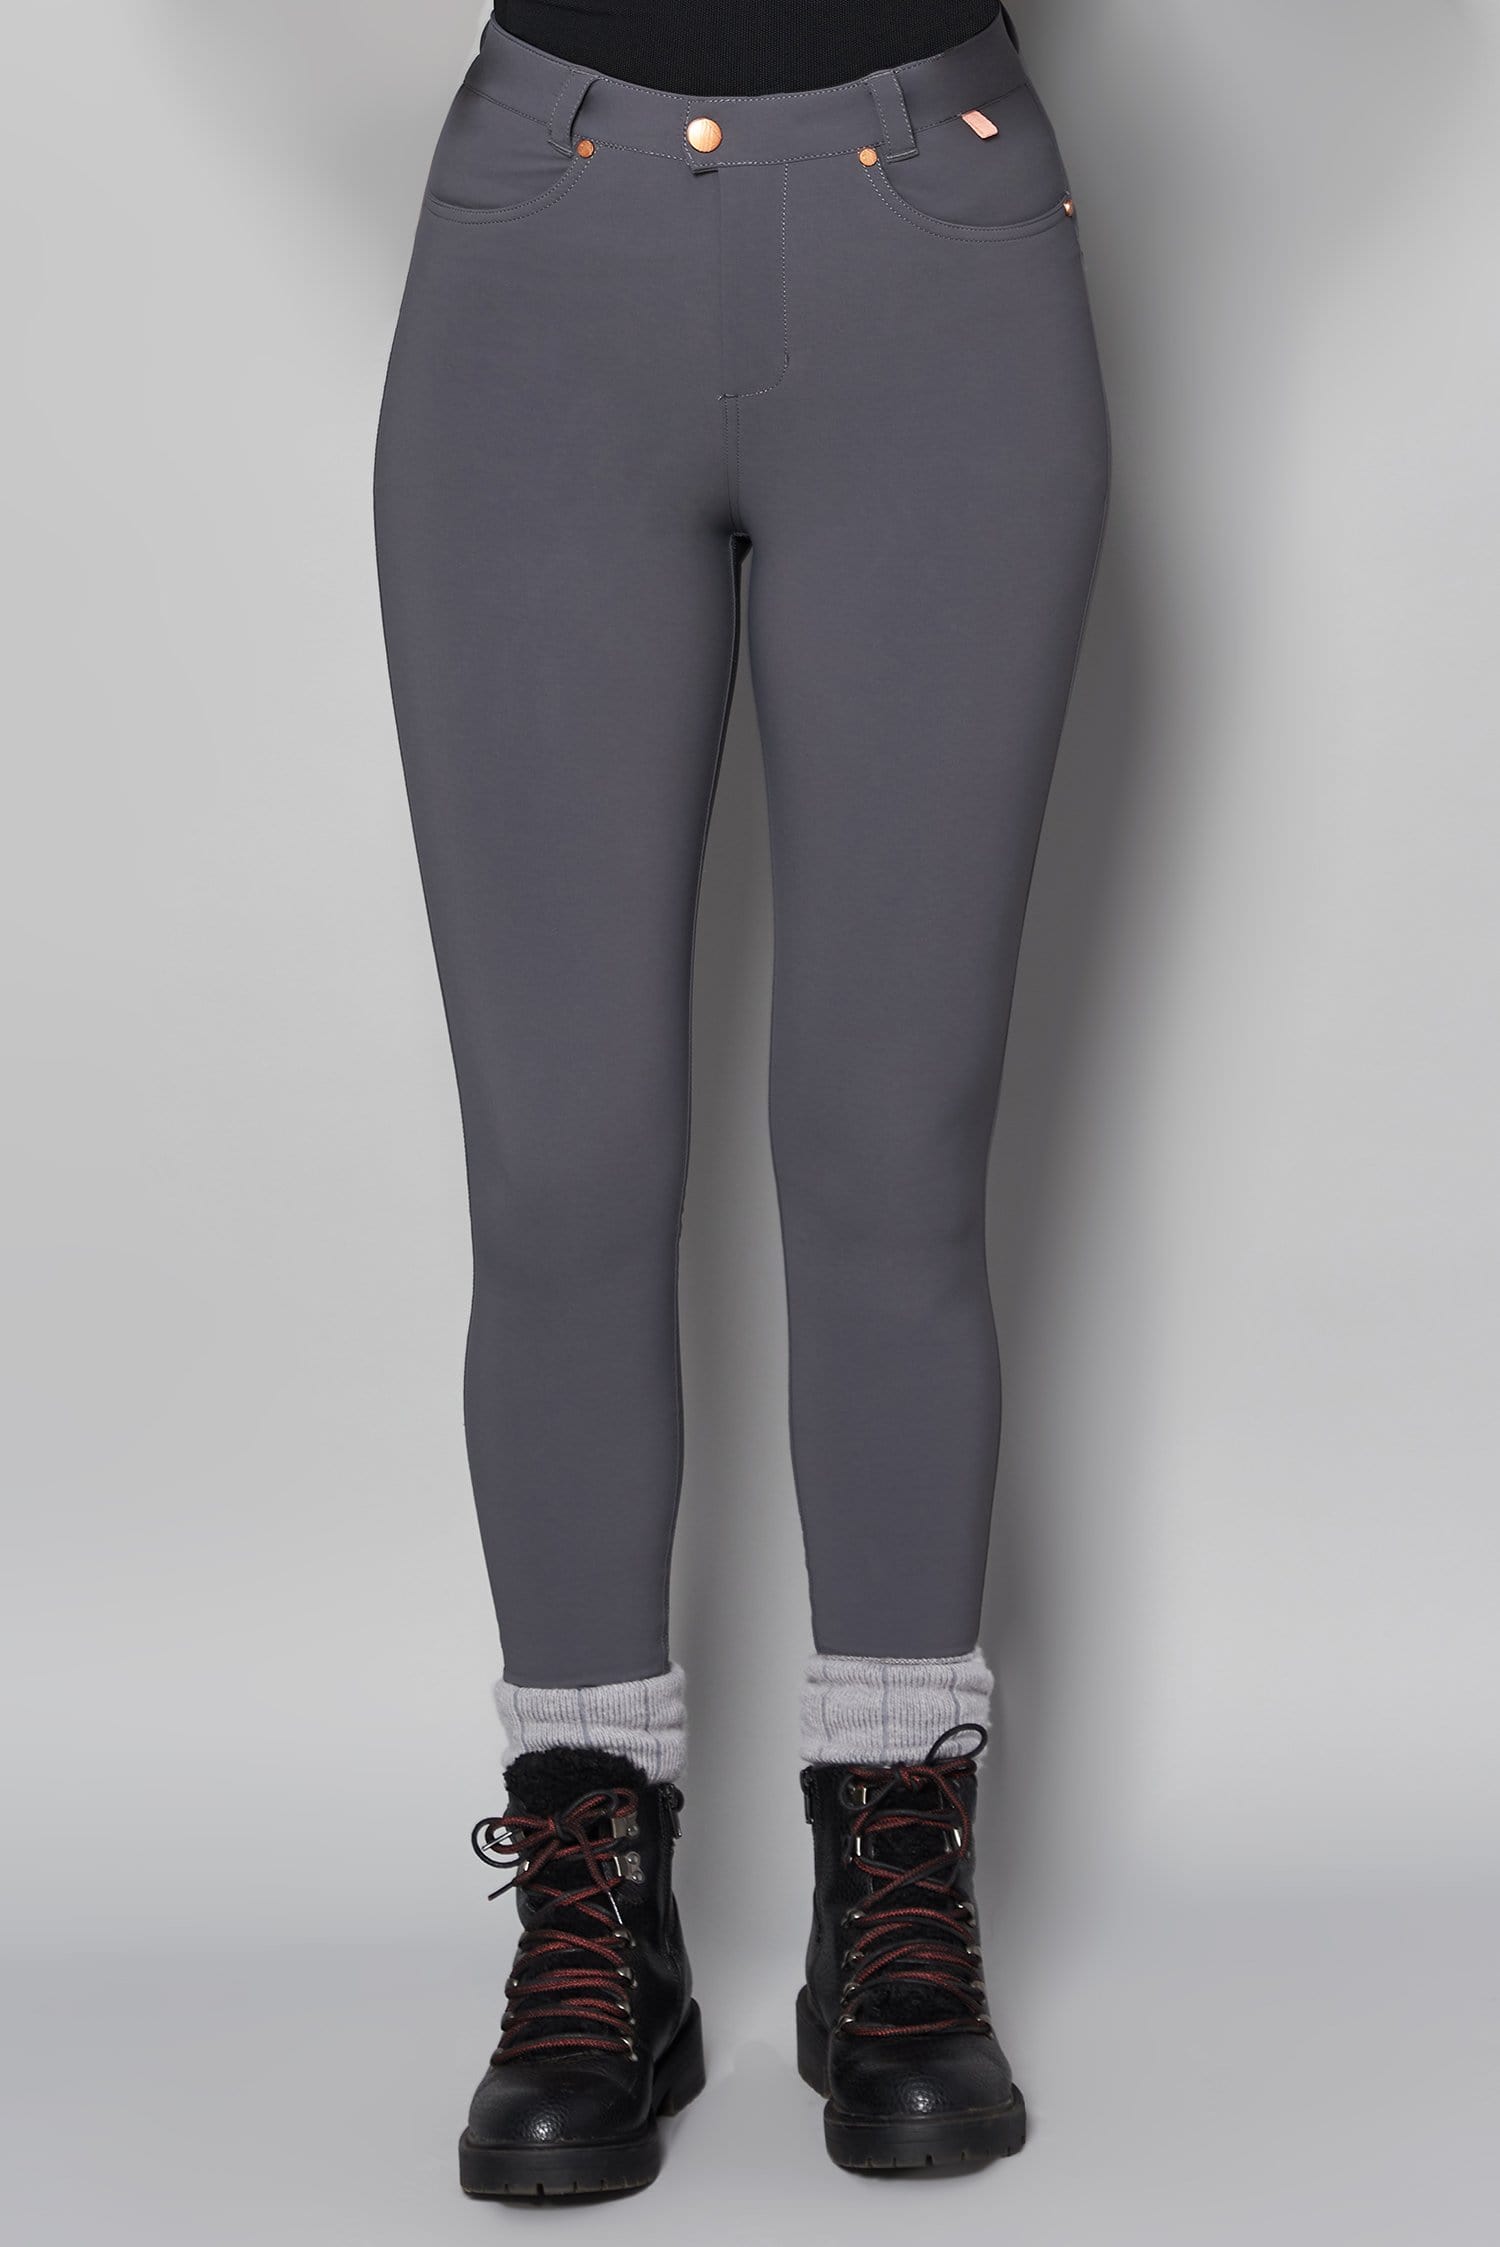 MAX Stretch Skinny Outdoor Trousers - Storm Grey - ACAI Activewear